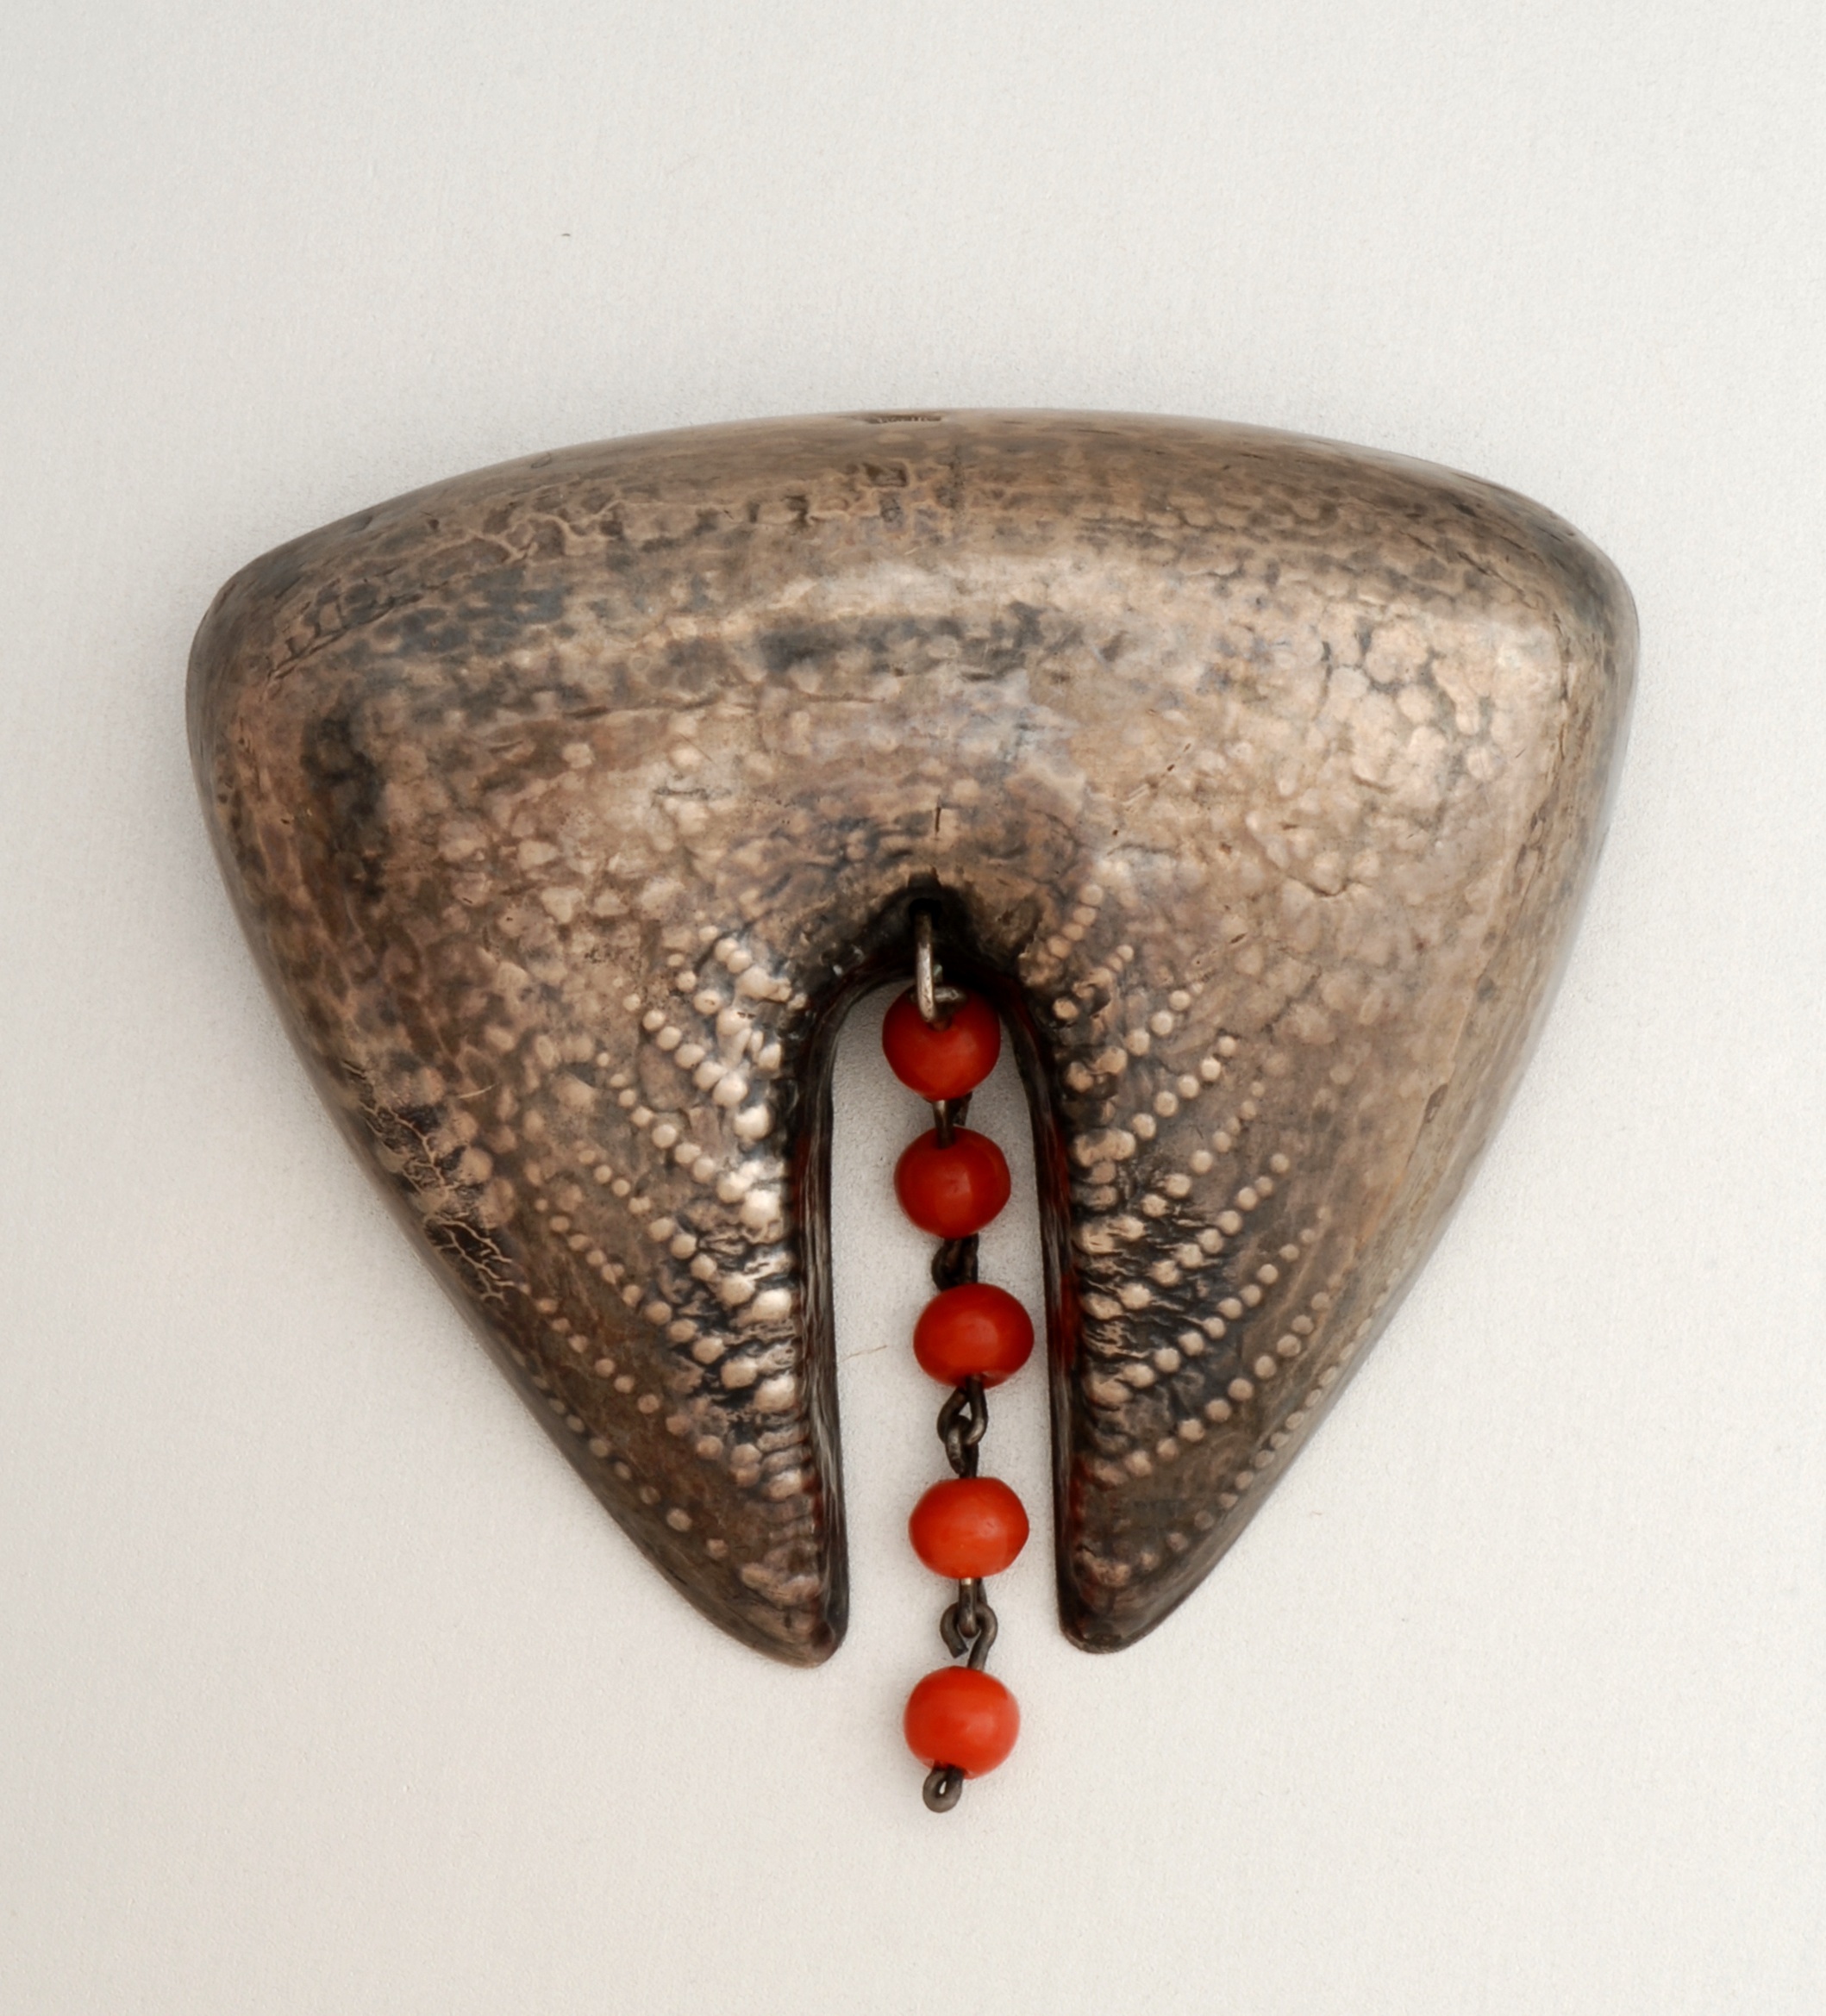 Fons Reggers (attr.) / Amsterdam School “Expressionistic” silver and red coral brooch, marks, c. 1923-34